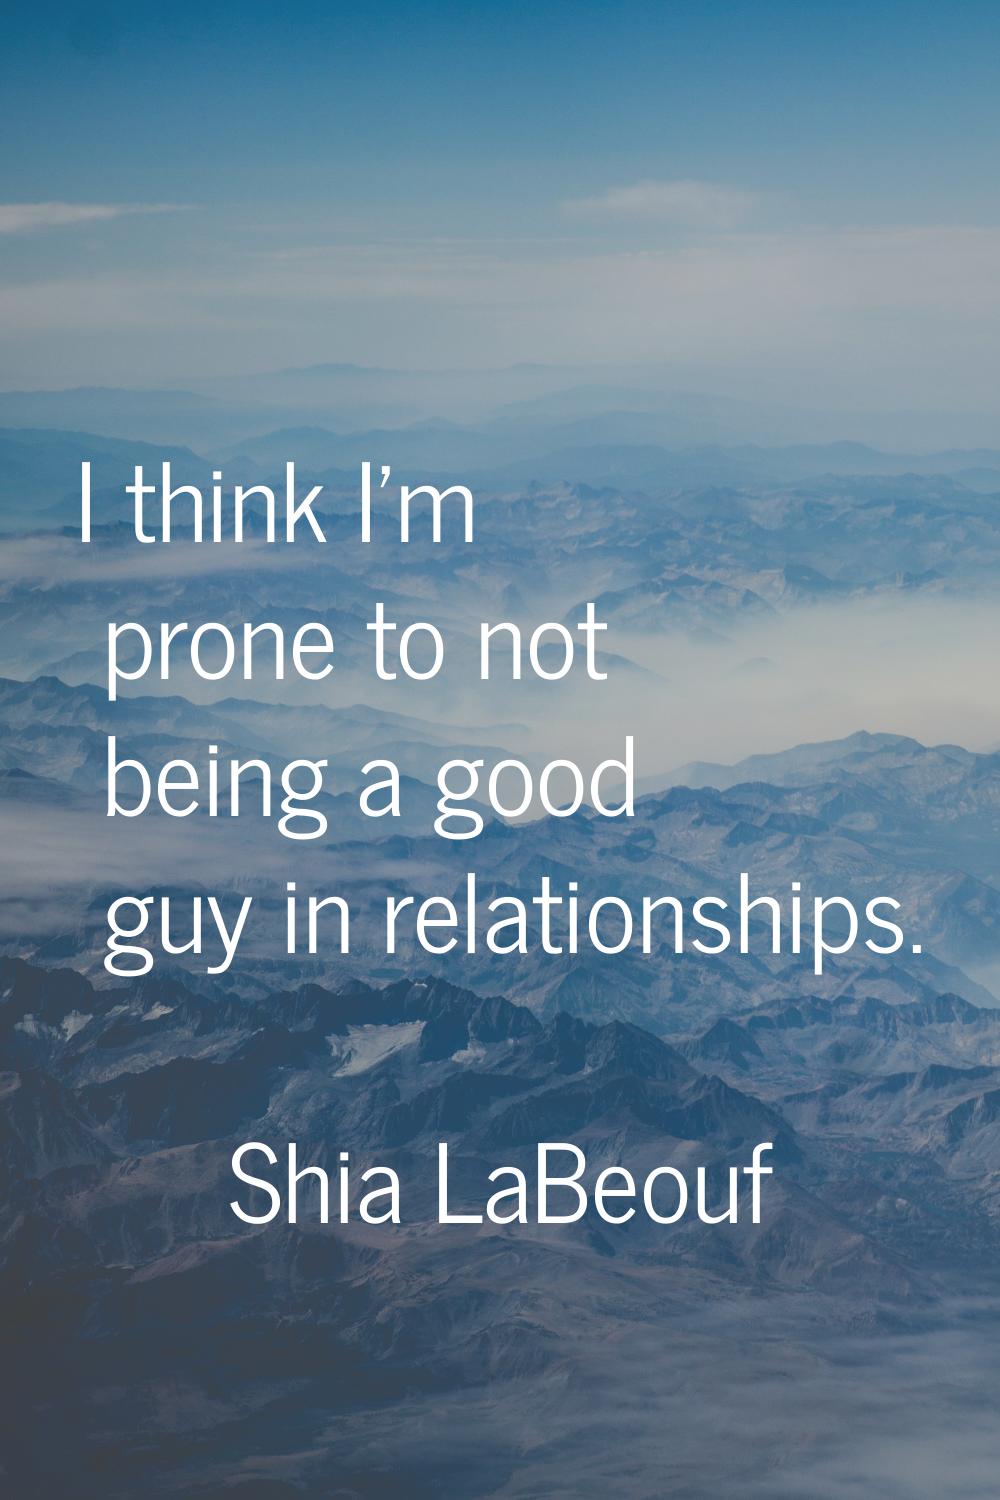 I think I'm prone to not being a good guy in relationships.